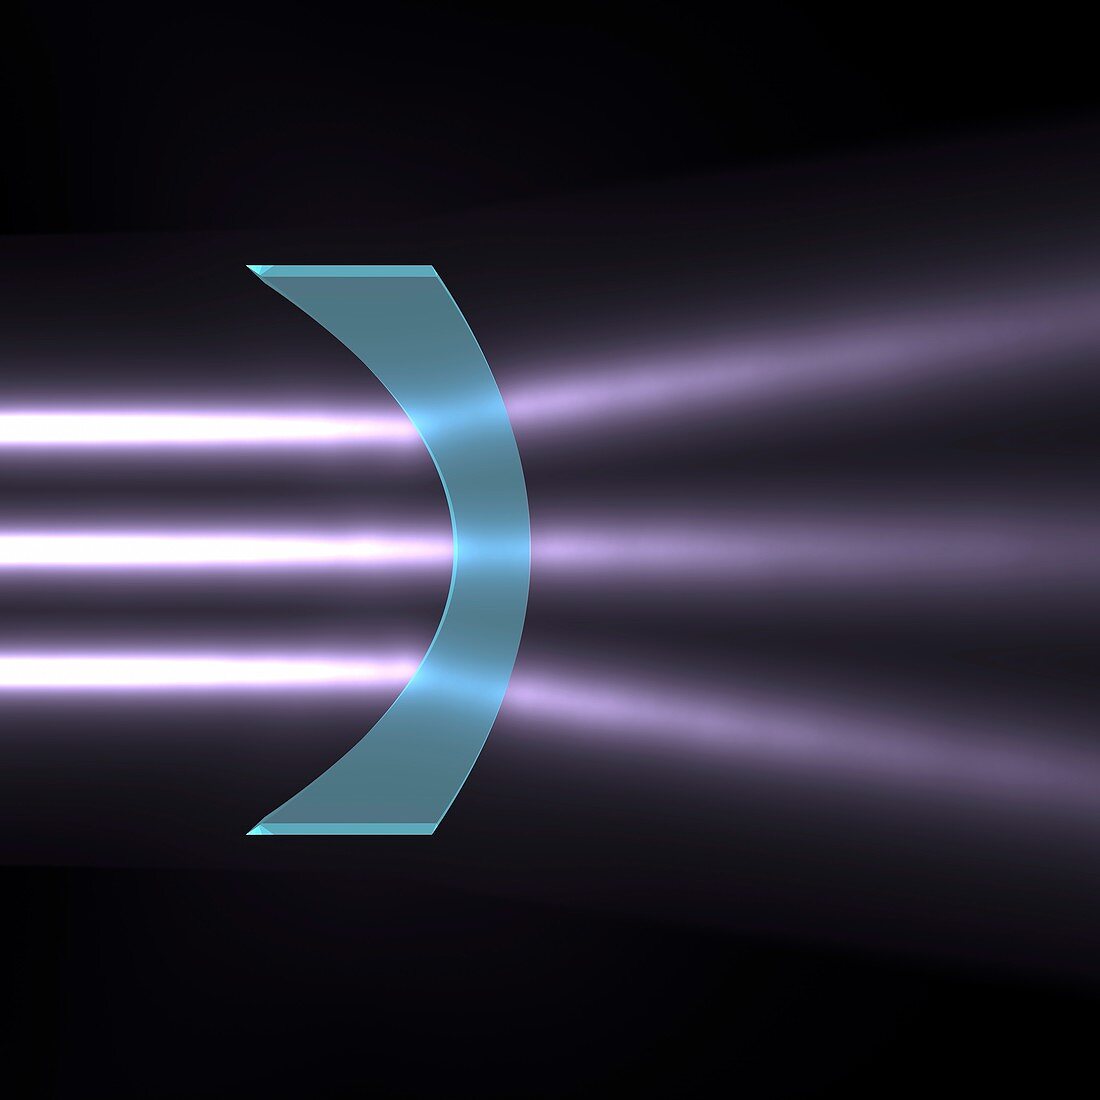 Light refraction with concave-convex lens